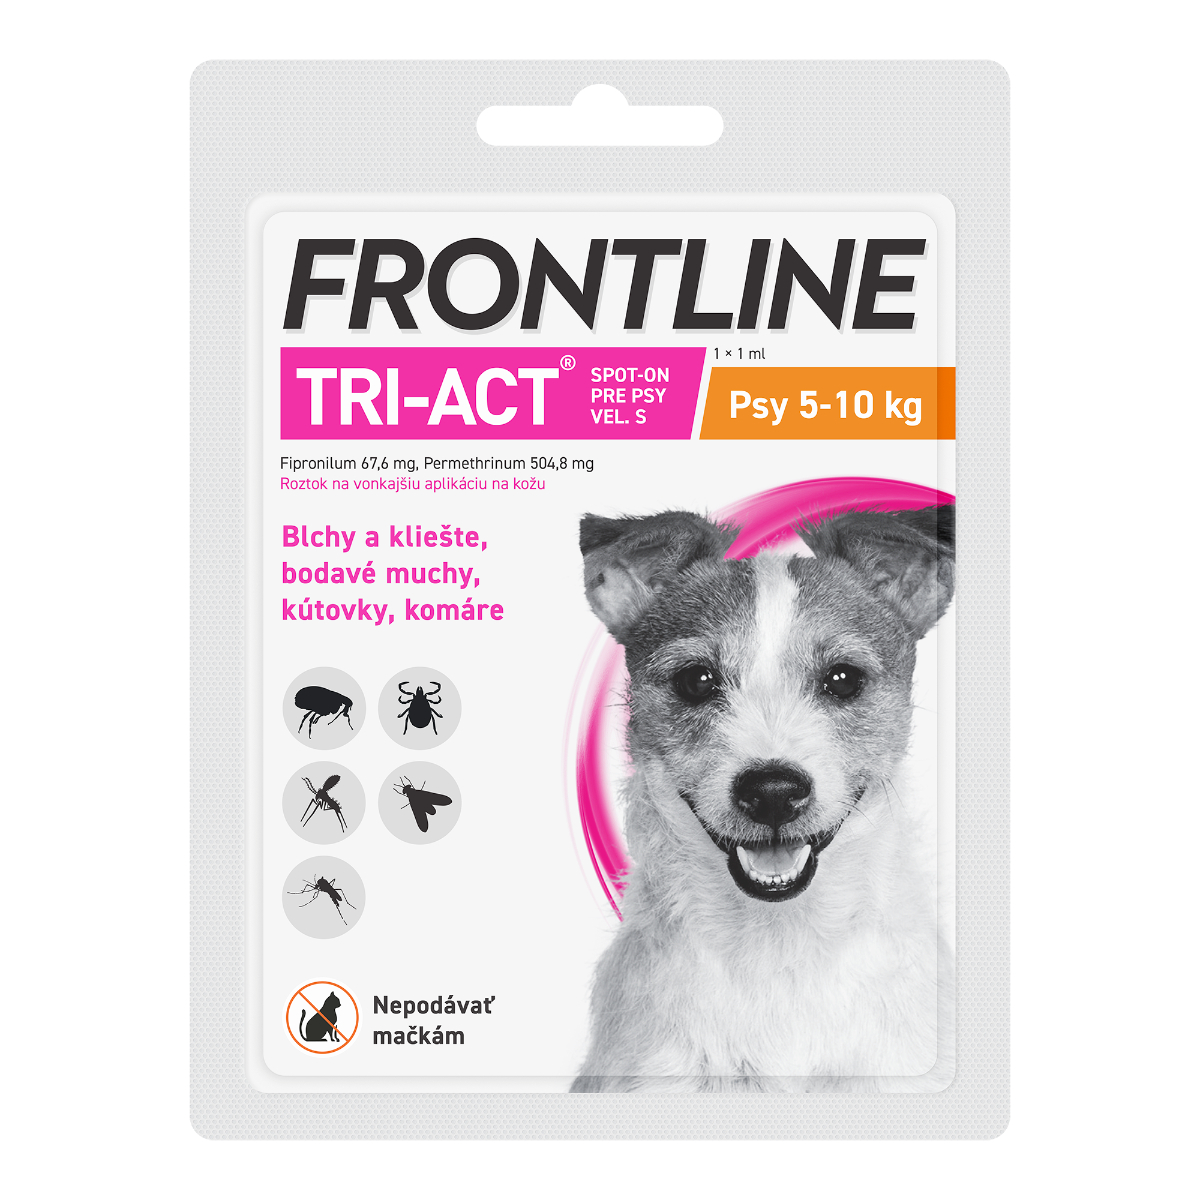 Frontline Tri-Act Spot-on dog S 5-10 kg 1 x 1 ml